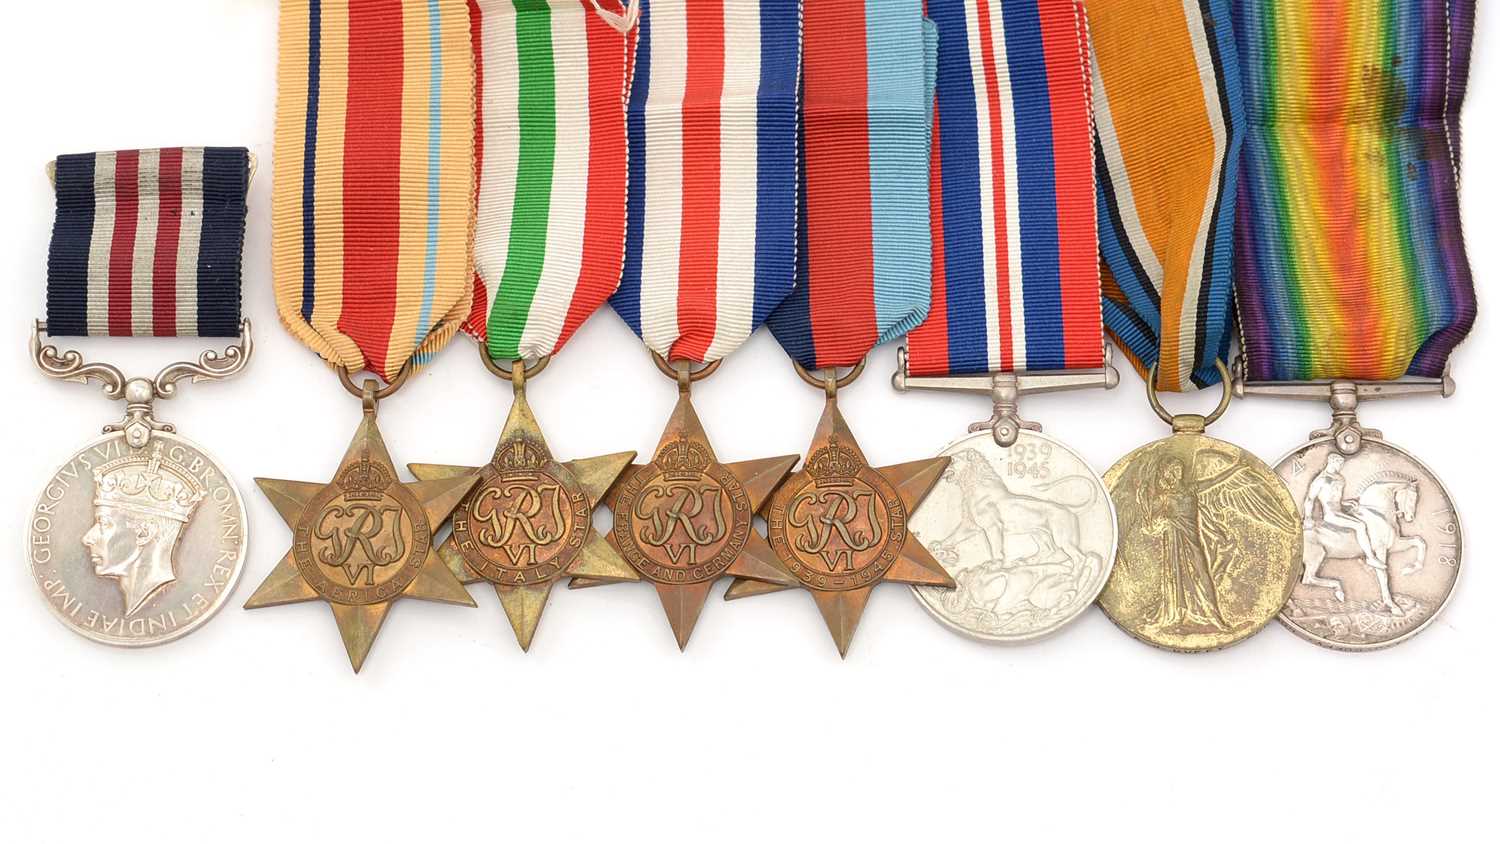 A Second World War Military Medal group and ephemera, awarded to 5121638 Lance-Corporal James Reed D